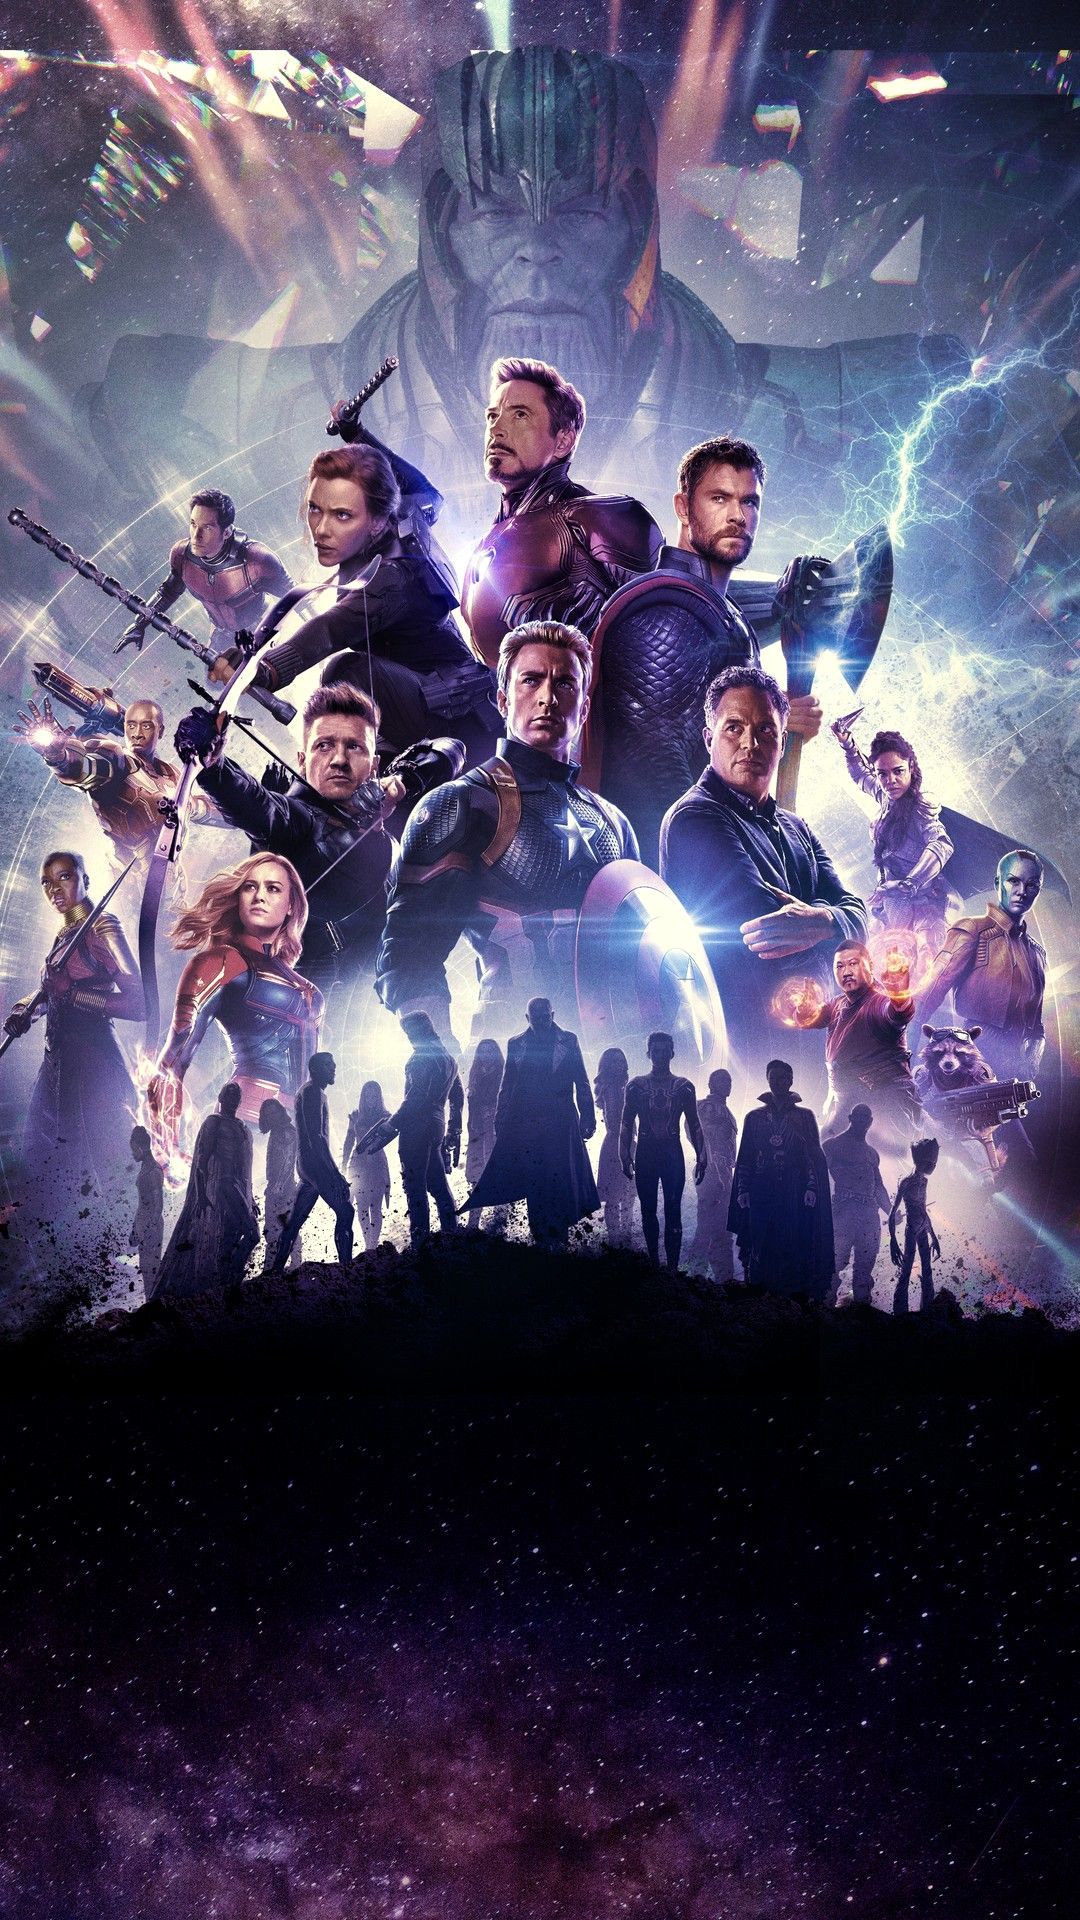 Awesome Avengers Endgame 2019 Android Wallpaper Best Movie Poster